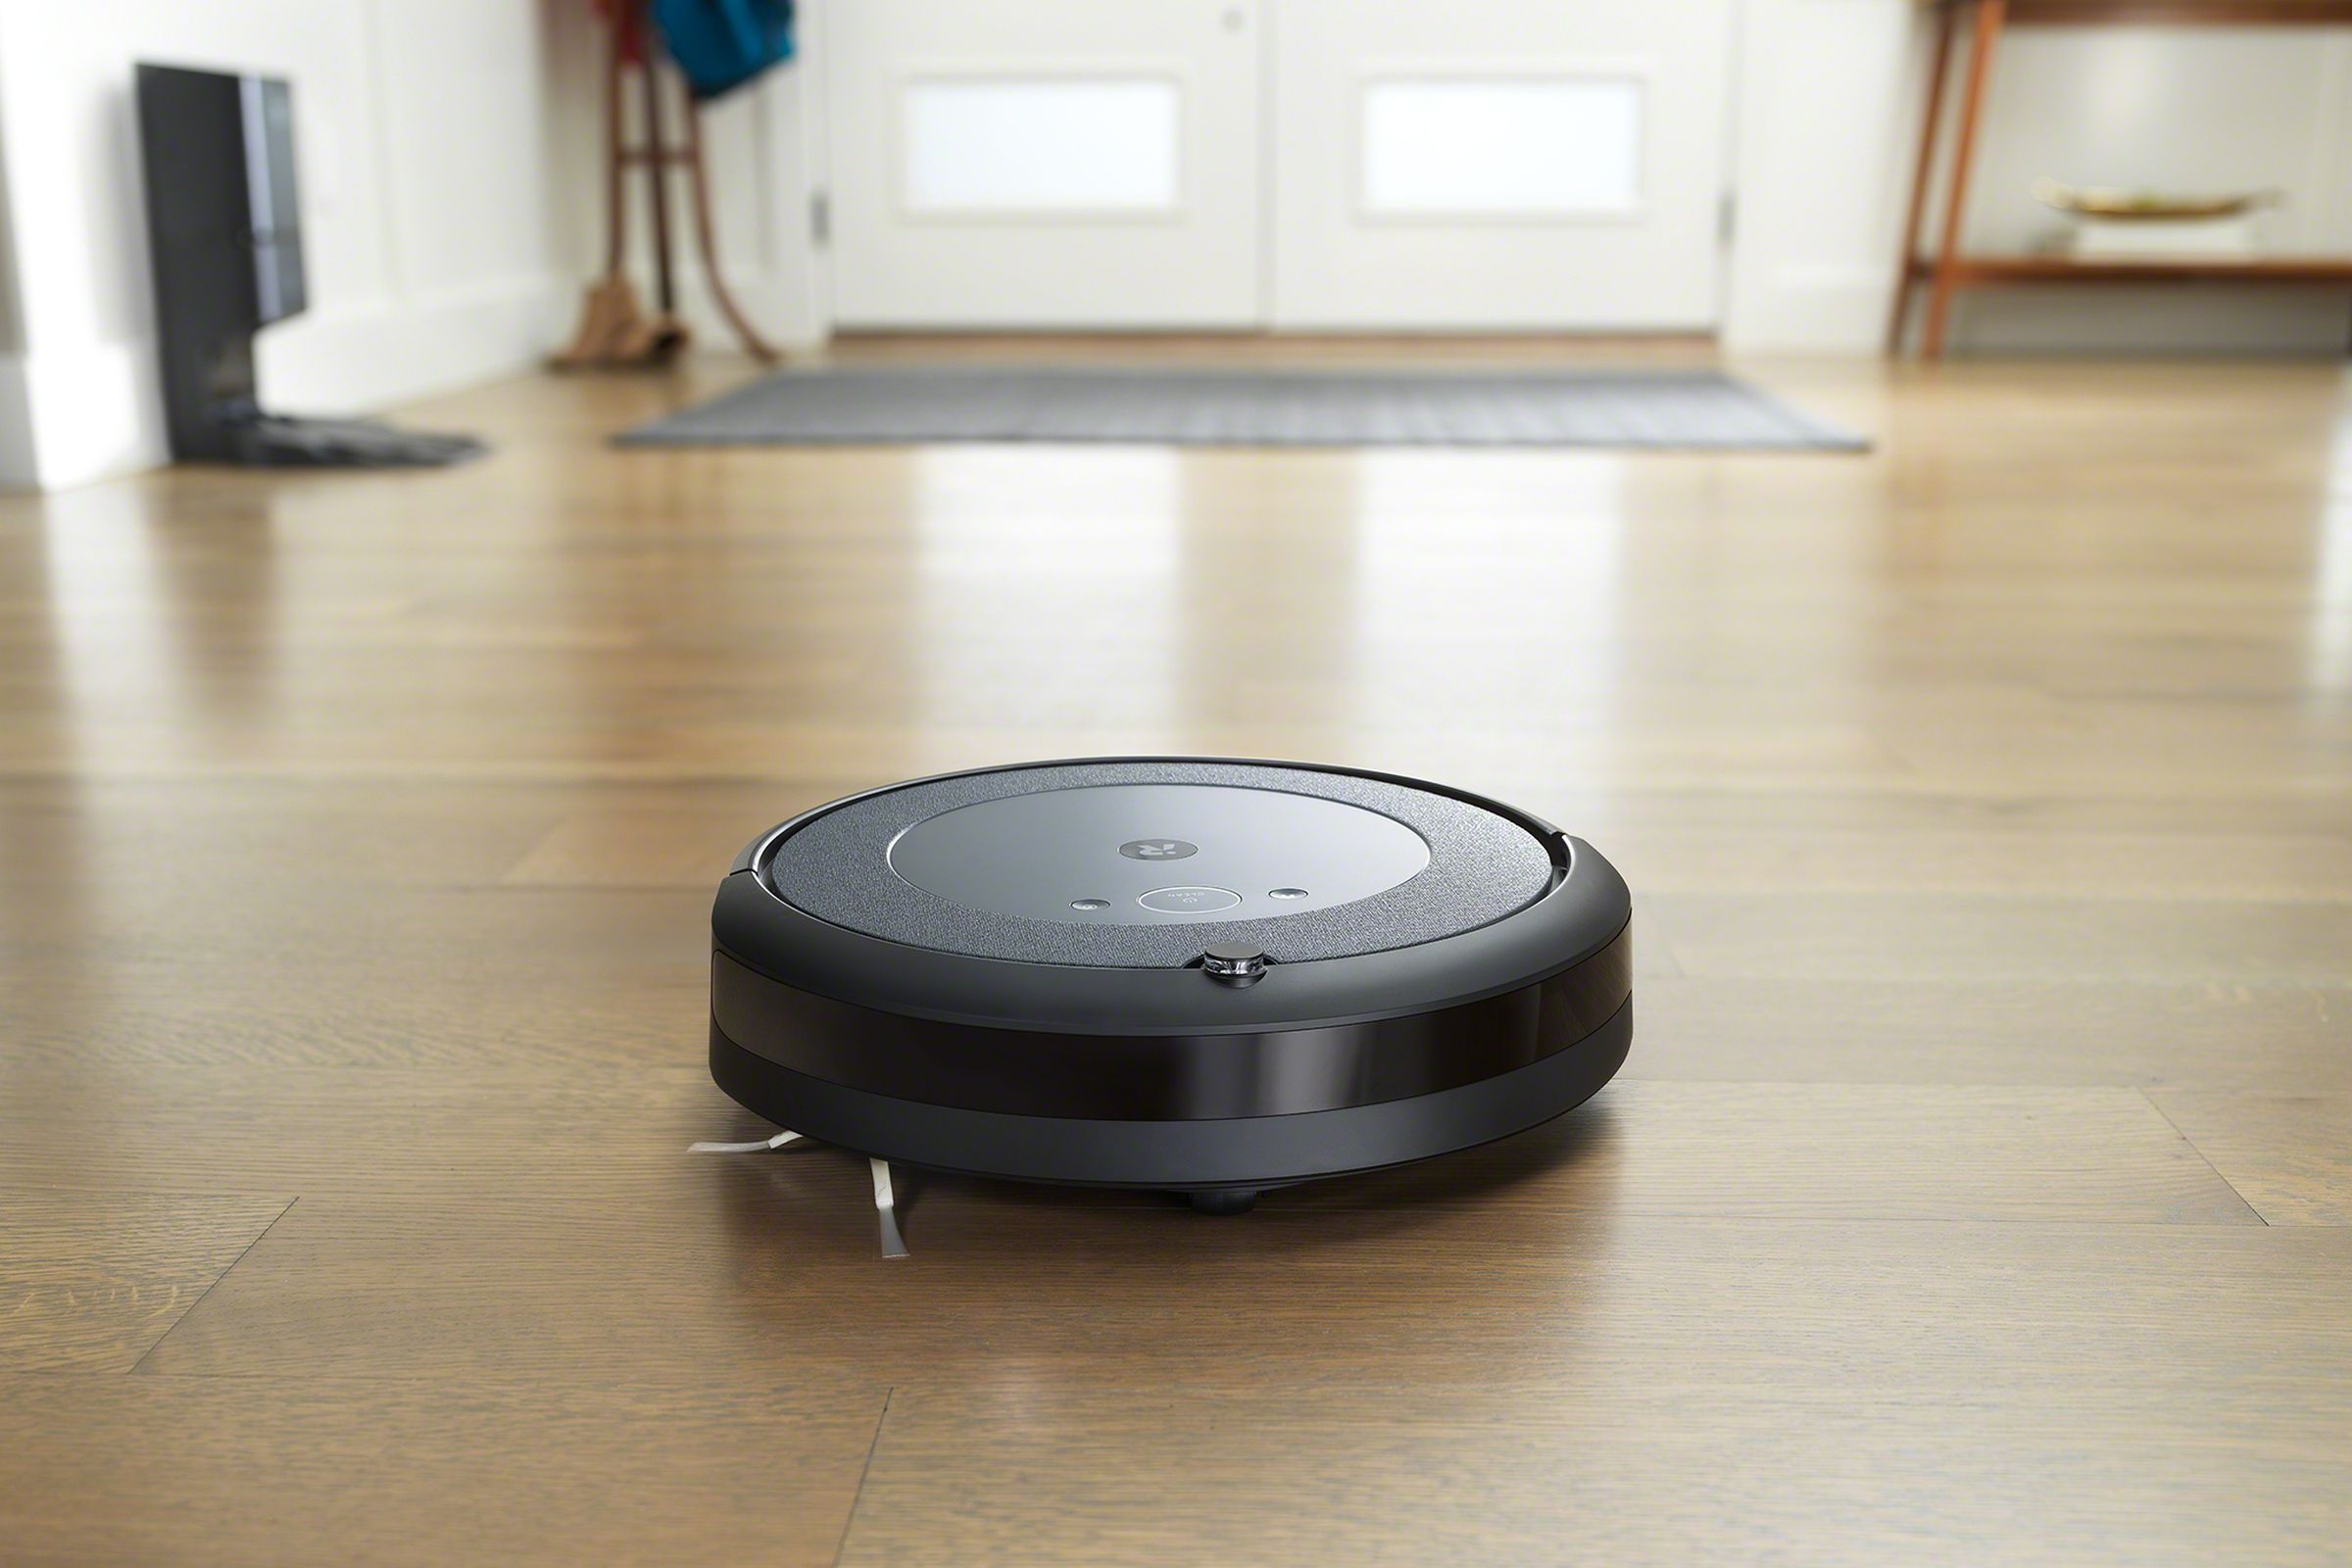 The iRobot Rooma i3 Plus packs a self-emptying clean station and new smart mapping features.